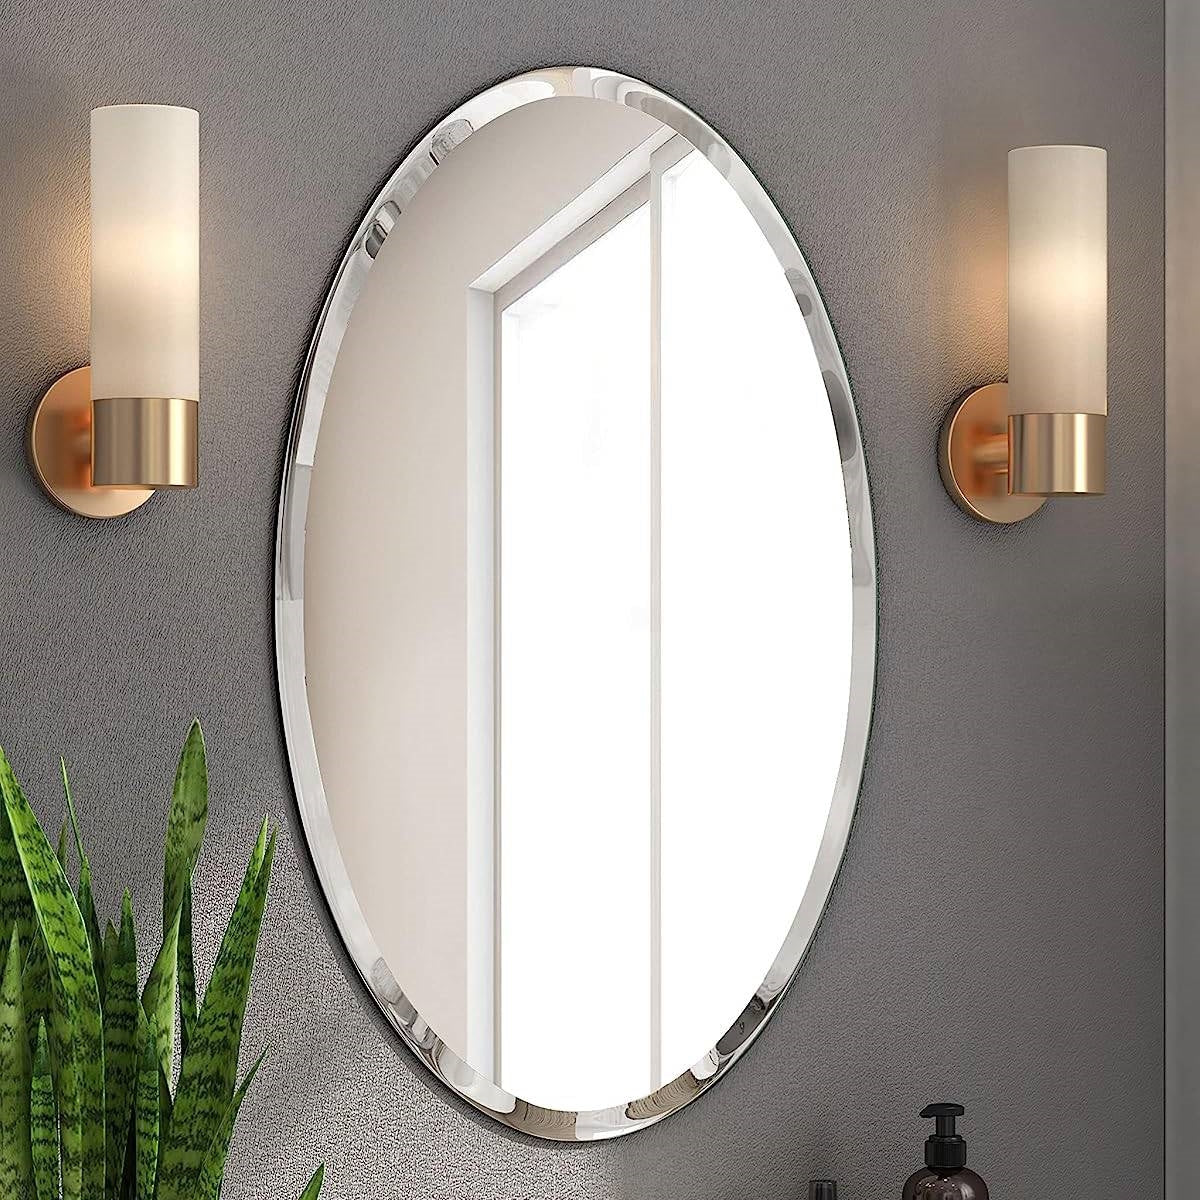 Accents > Mirrors - Oval Frameless 35-inch Beveled Bathroom Bedroom Living Room Vanity Wall Mirror